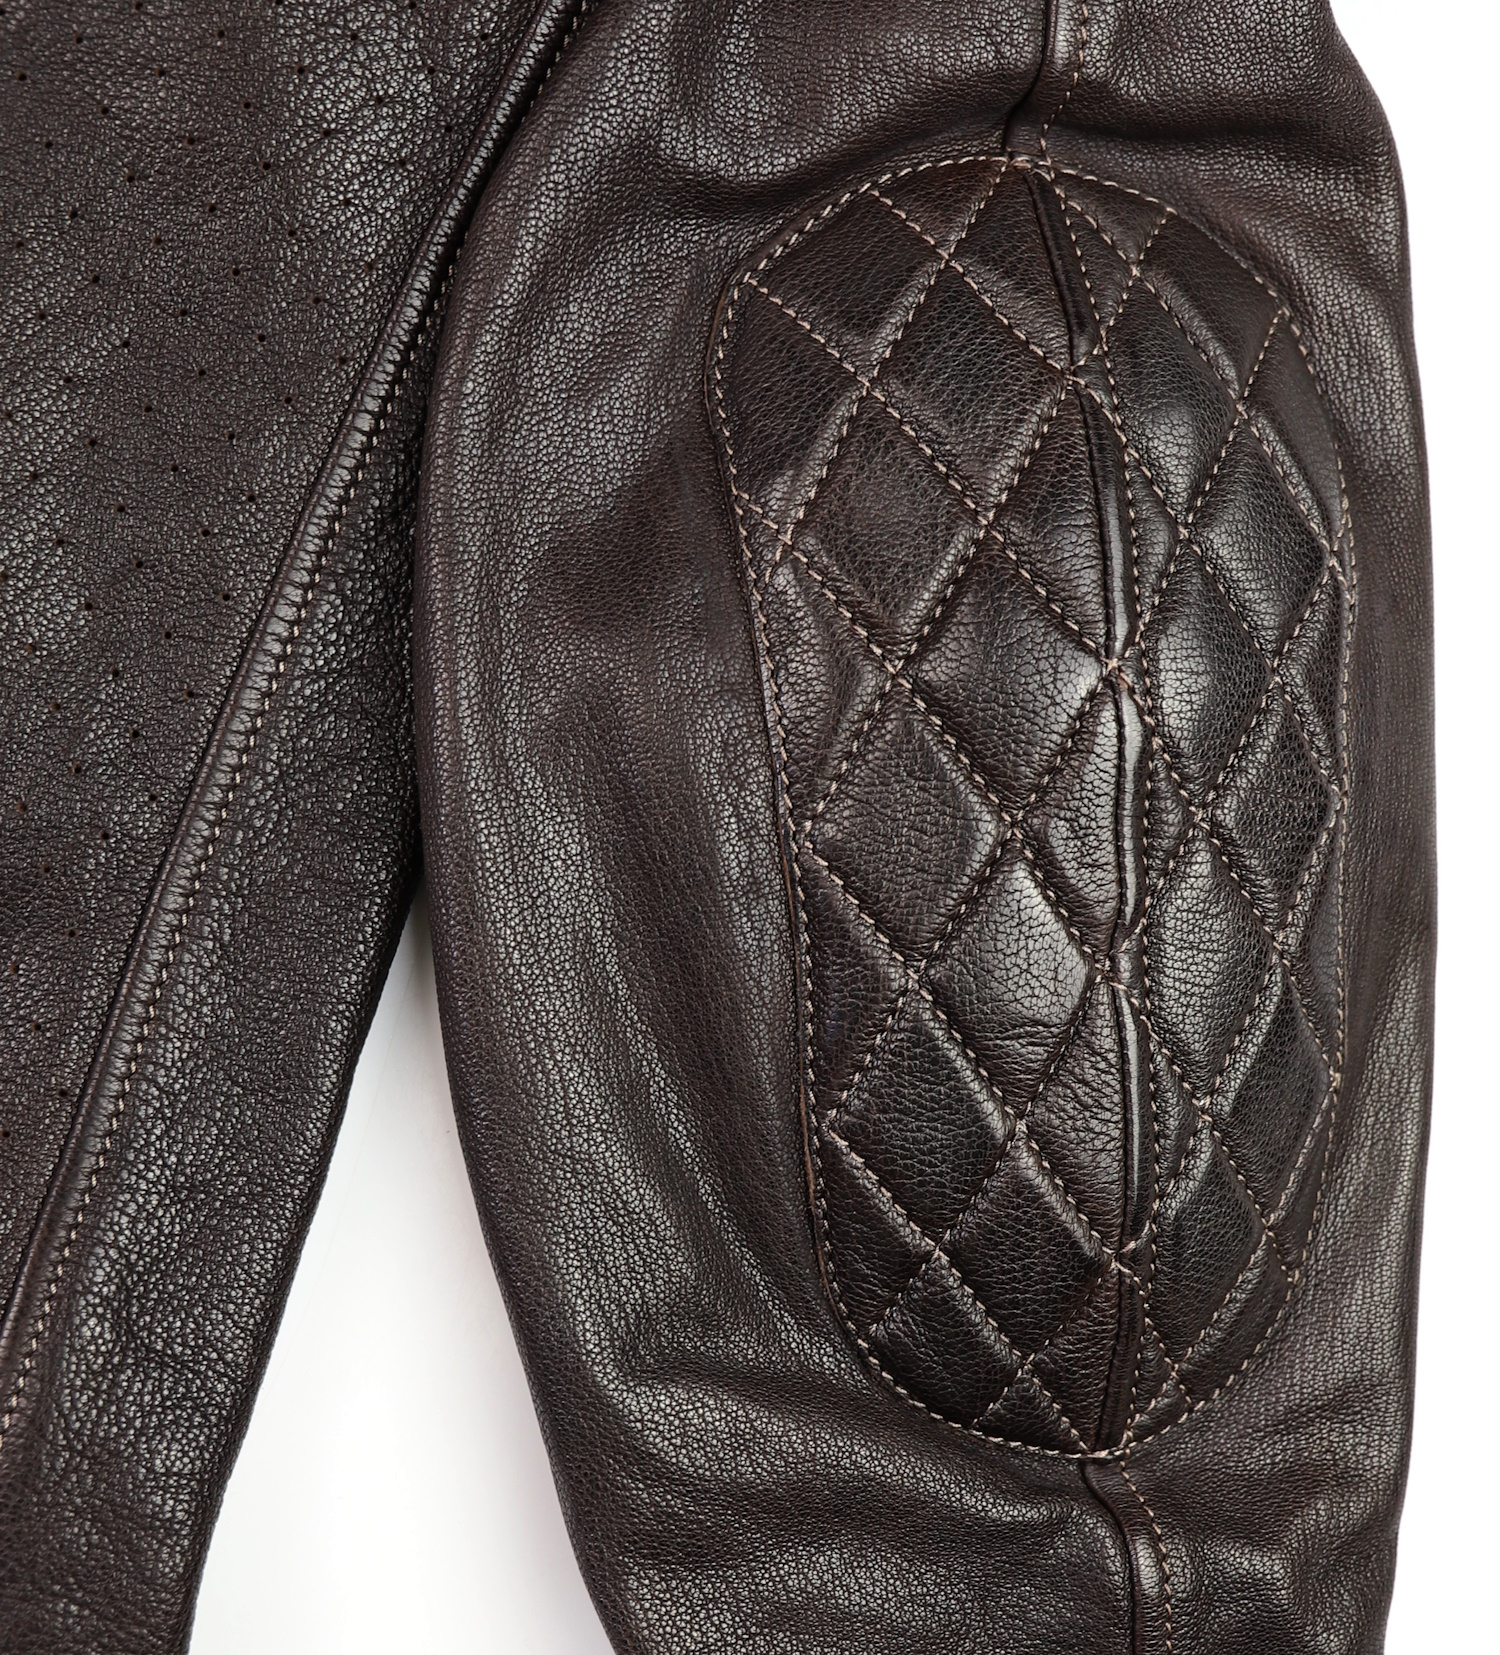 Thedi Maximos Cafe Racer Brown Goatskin elbow quilting.jpg